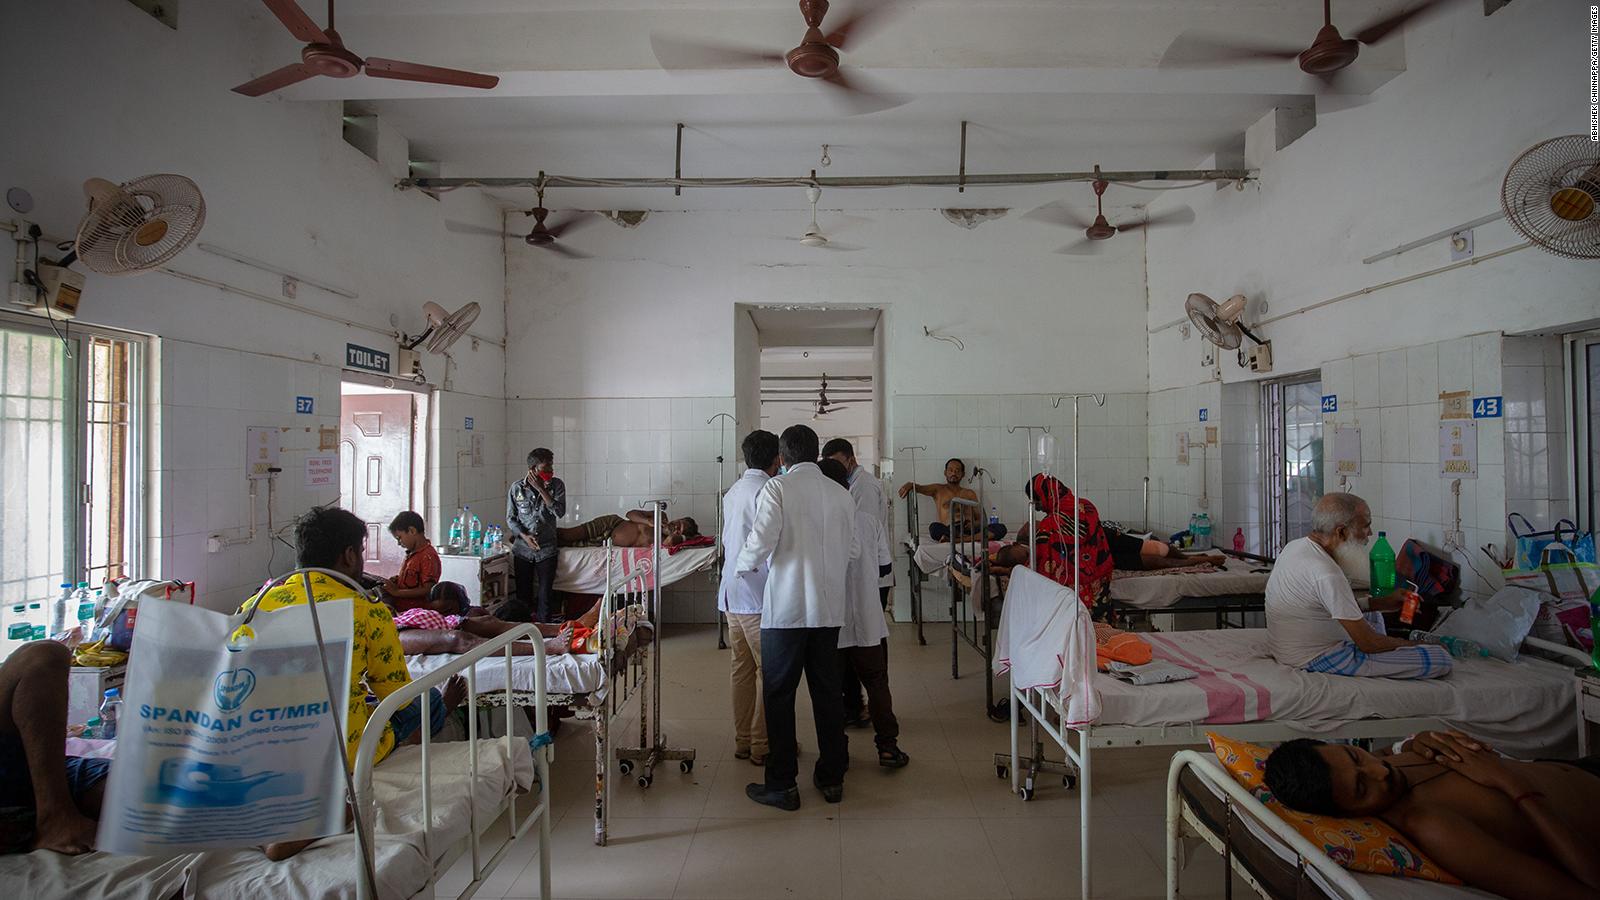 Desperation and anguish live in hospitals and morgues in India after a devastating train accident